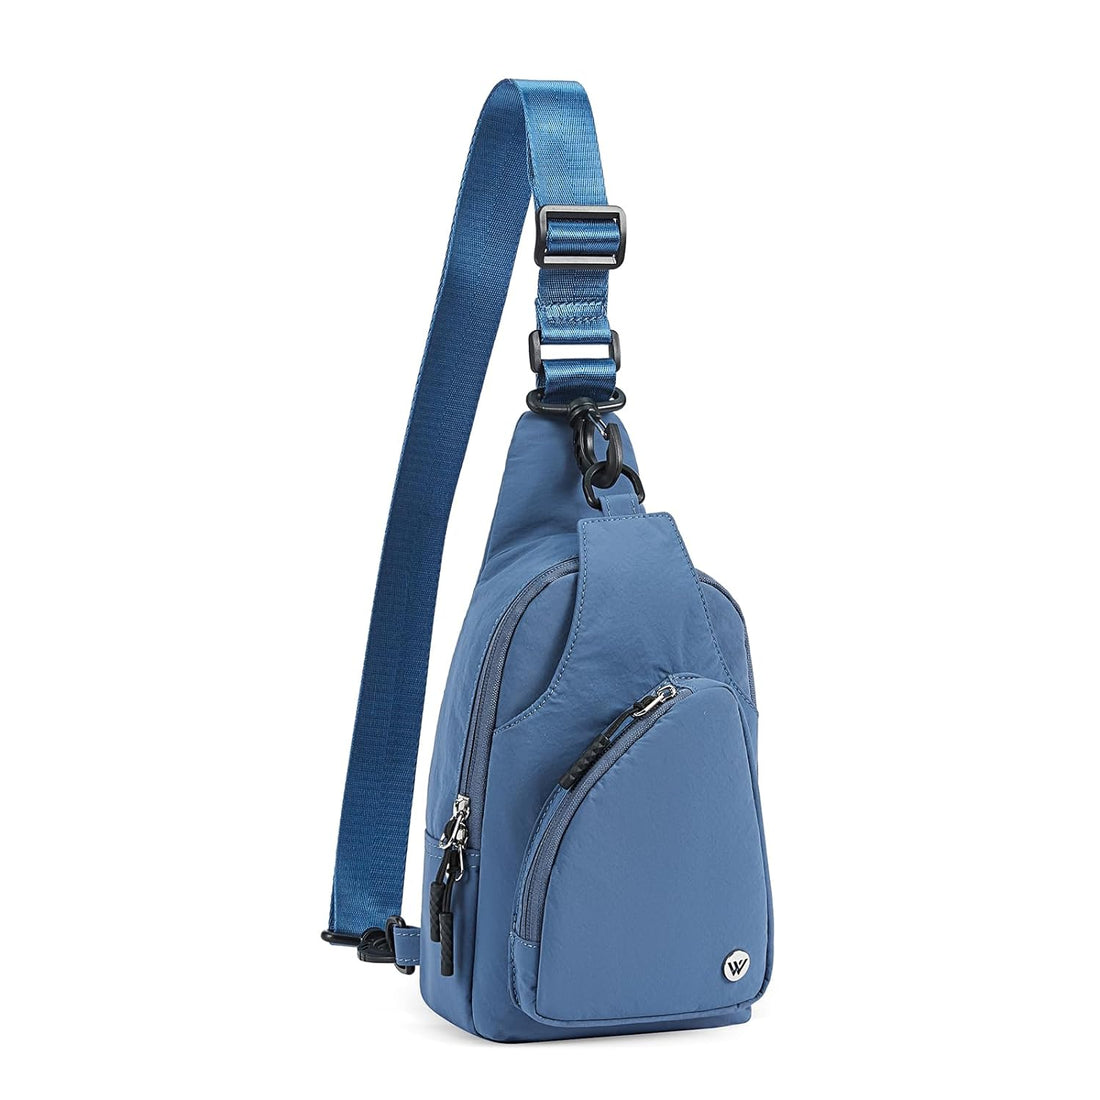 WESTBRONCO Small Sling Bag for Women Nylon Crossbody Fanny Pack Sling Backpck Lightweight for Travel Casual Daily, Blue